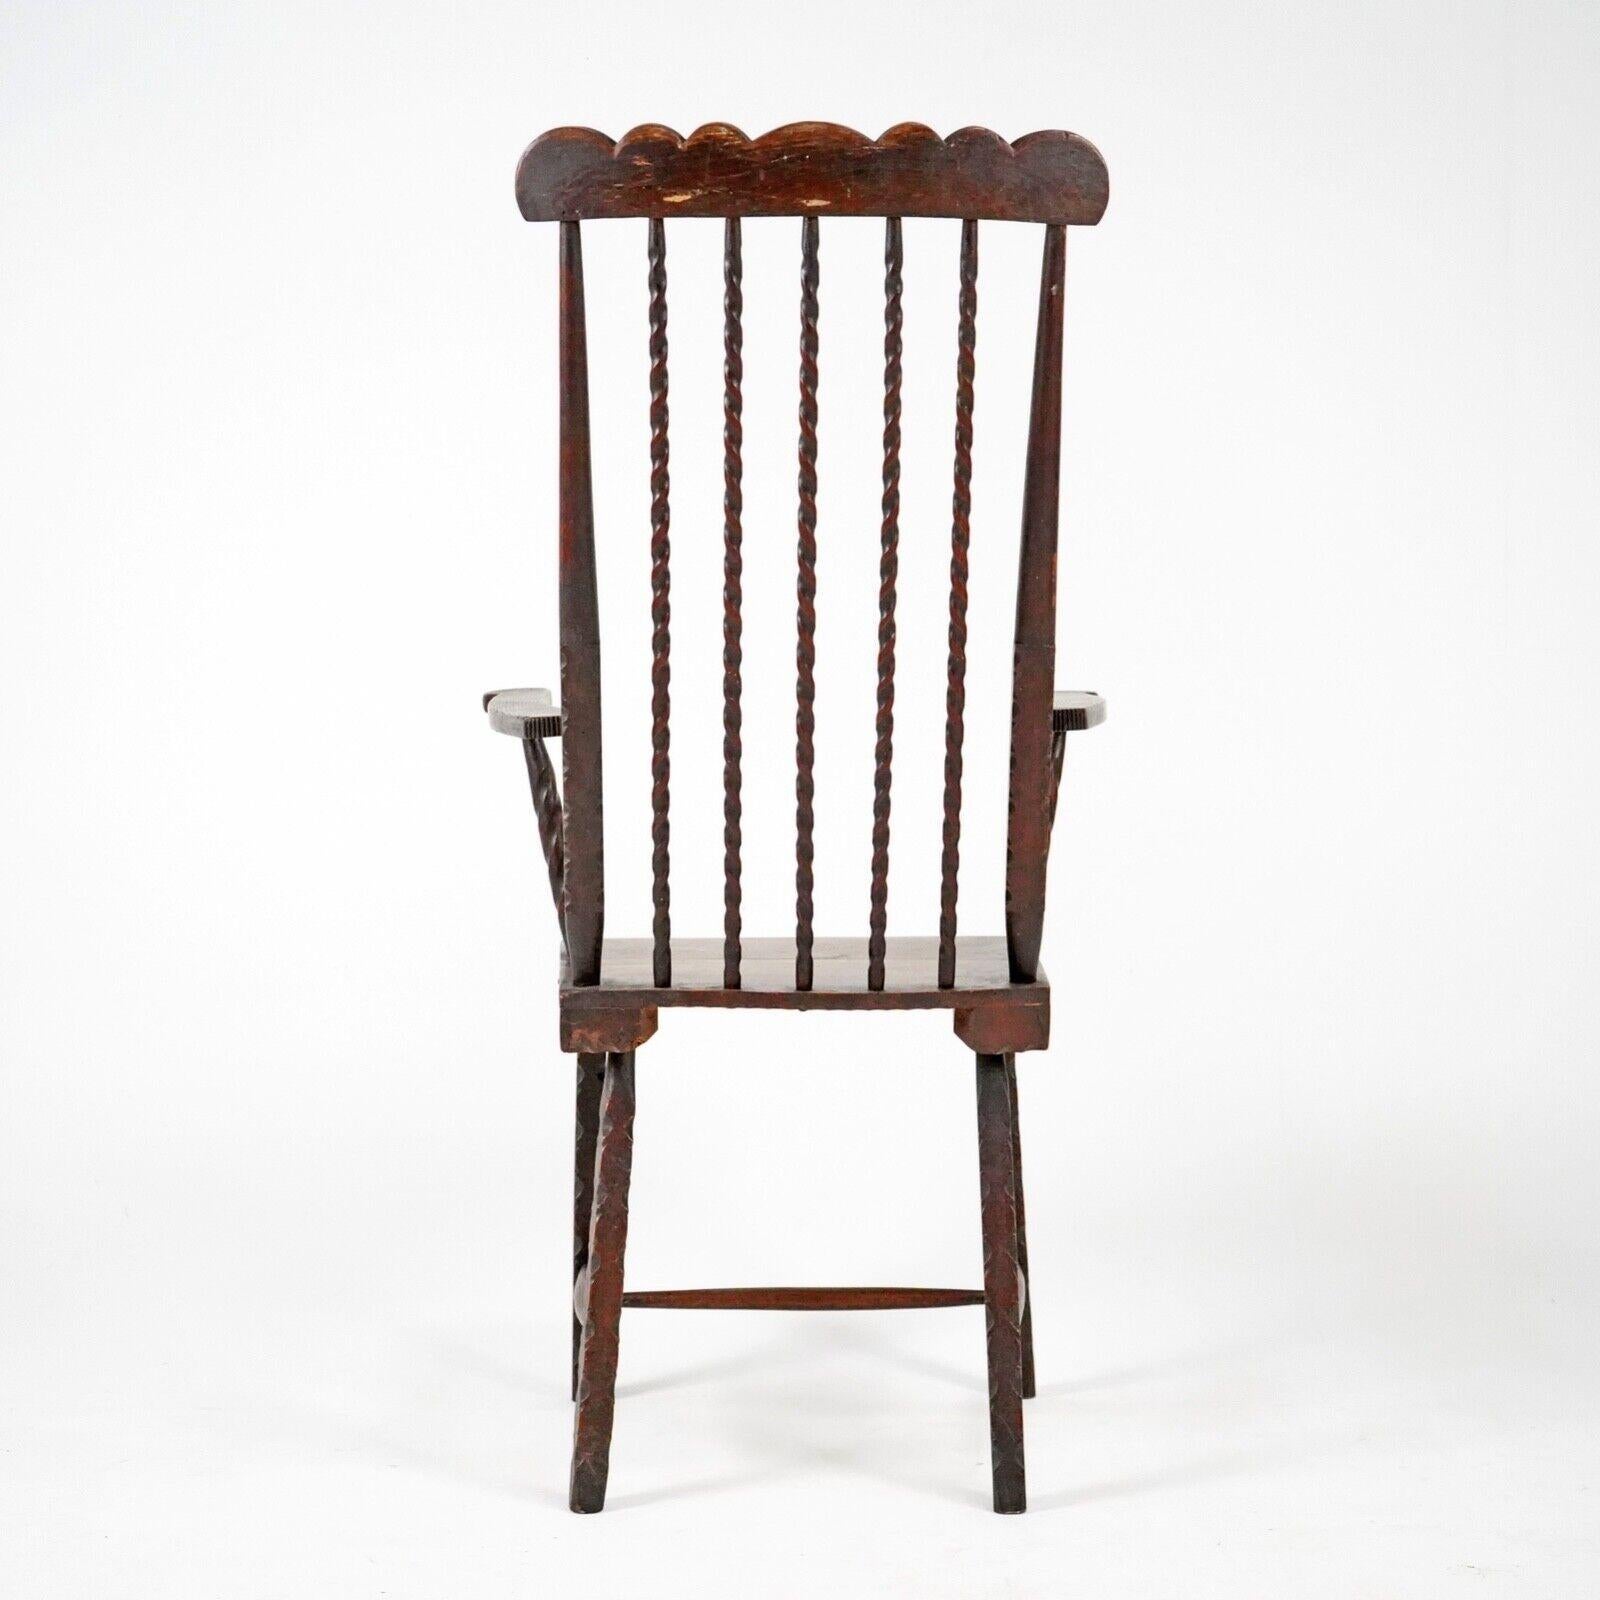 Country 19th Century Folk Art Stick Back Chair Comb Back Windsor Antique Armchair